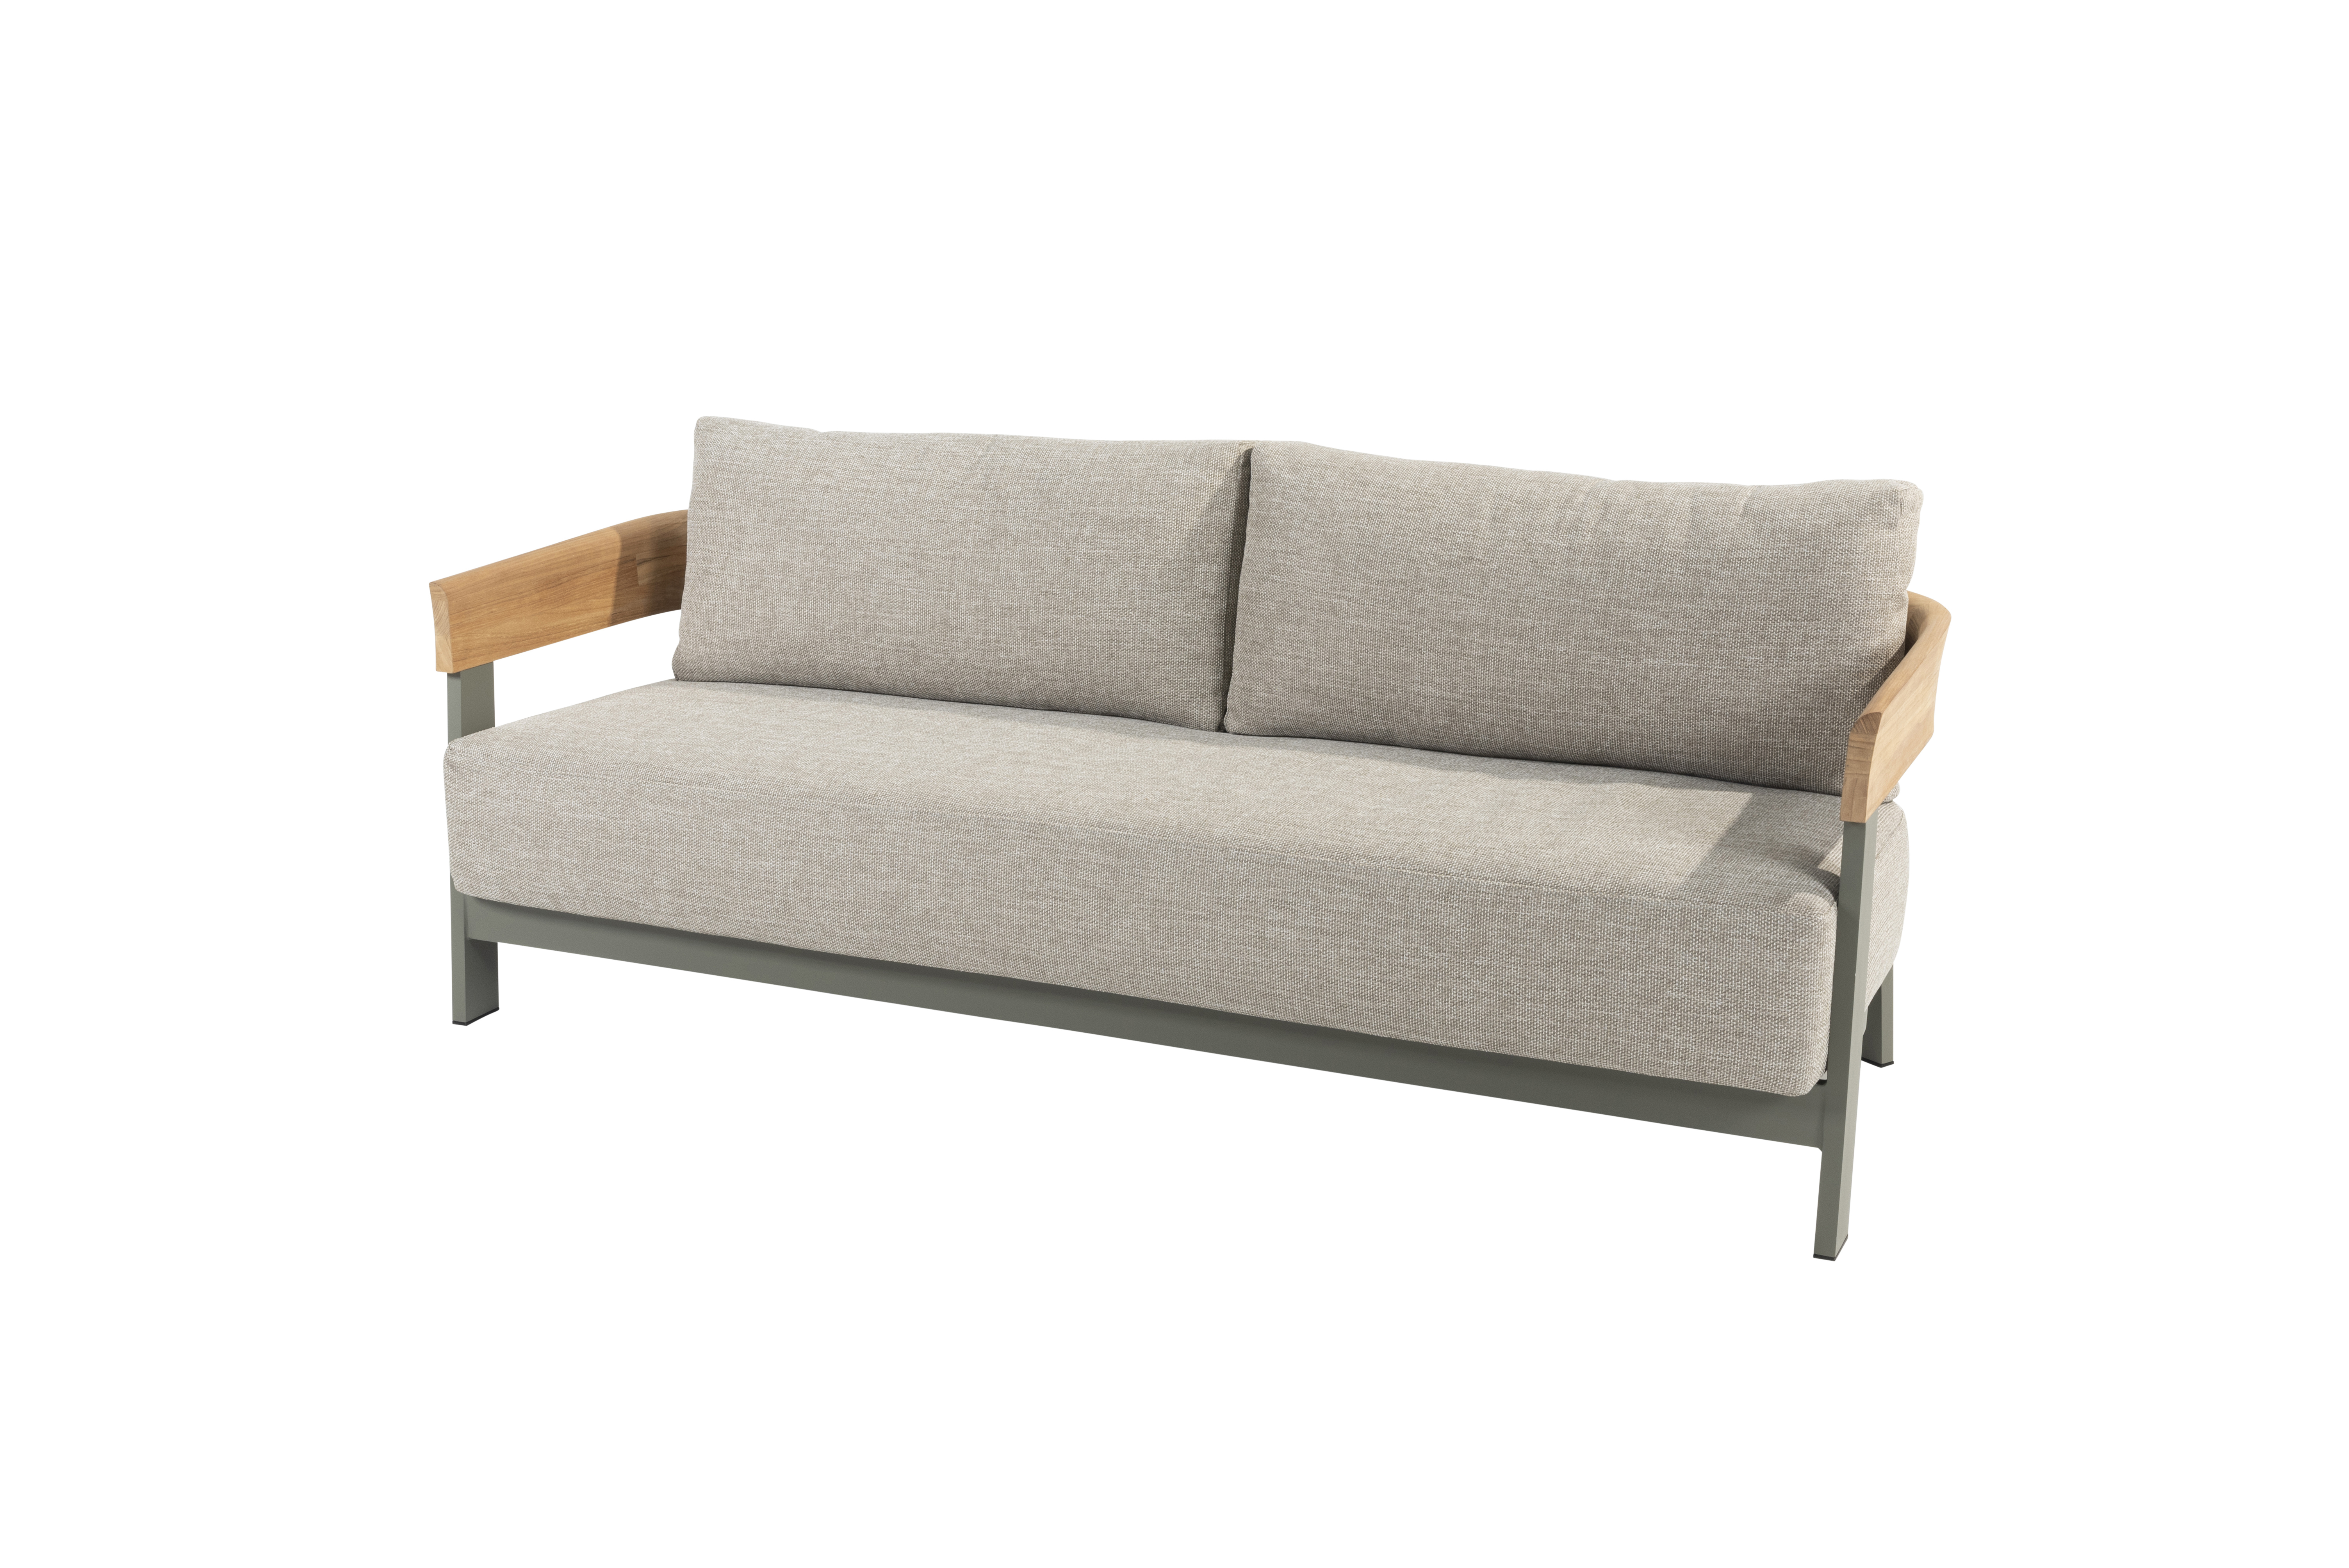 Varenna living bench olive with 3 cushions 